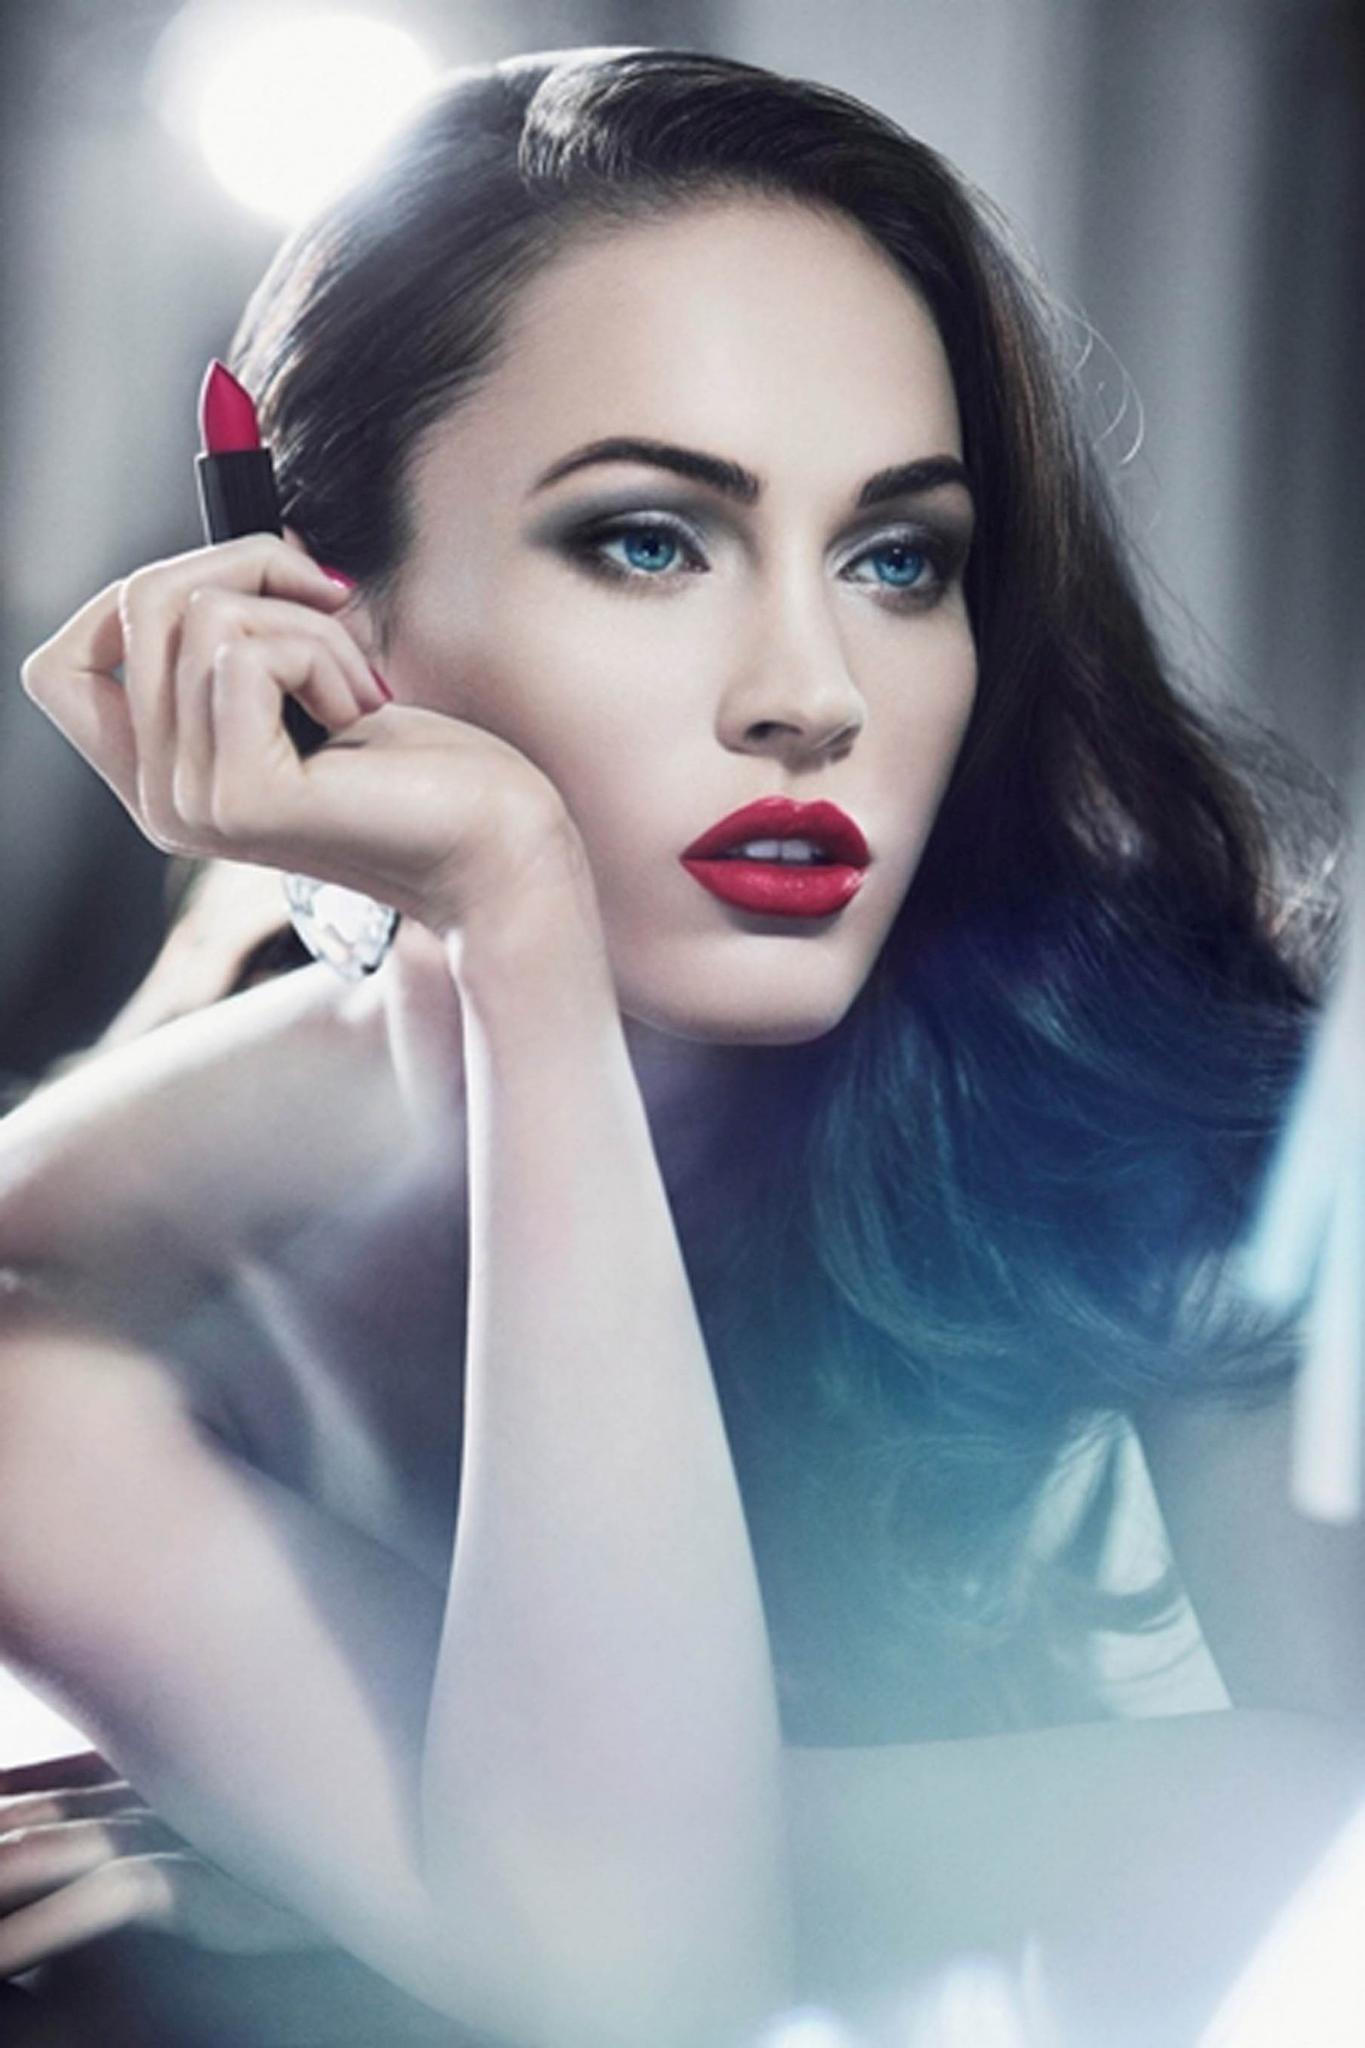 Happy Birthday to the beautiful Megan Fox, a brunette hair icon if ever there was one! 